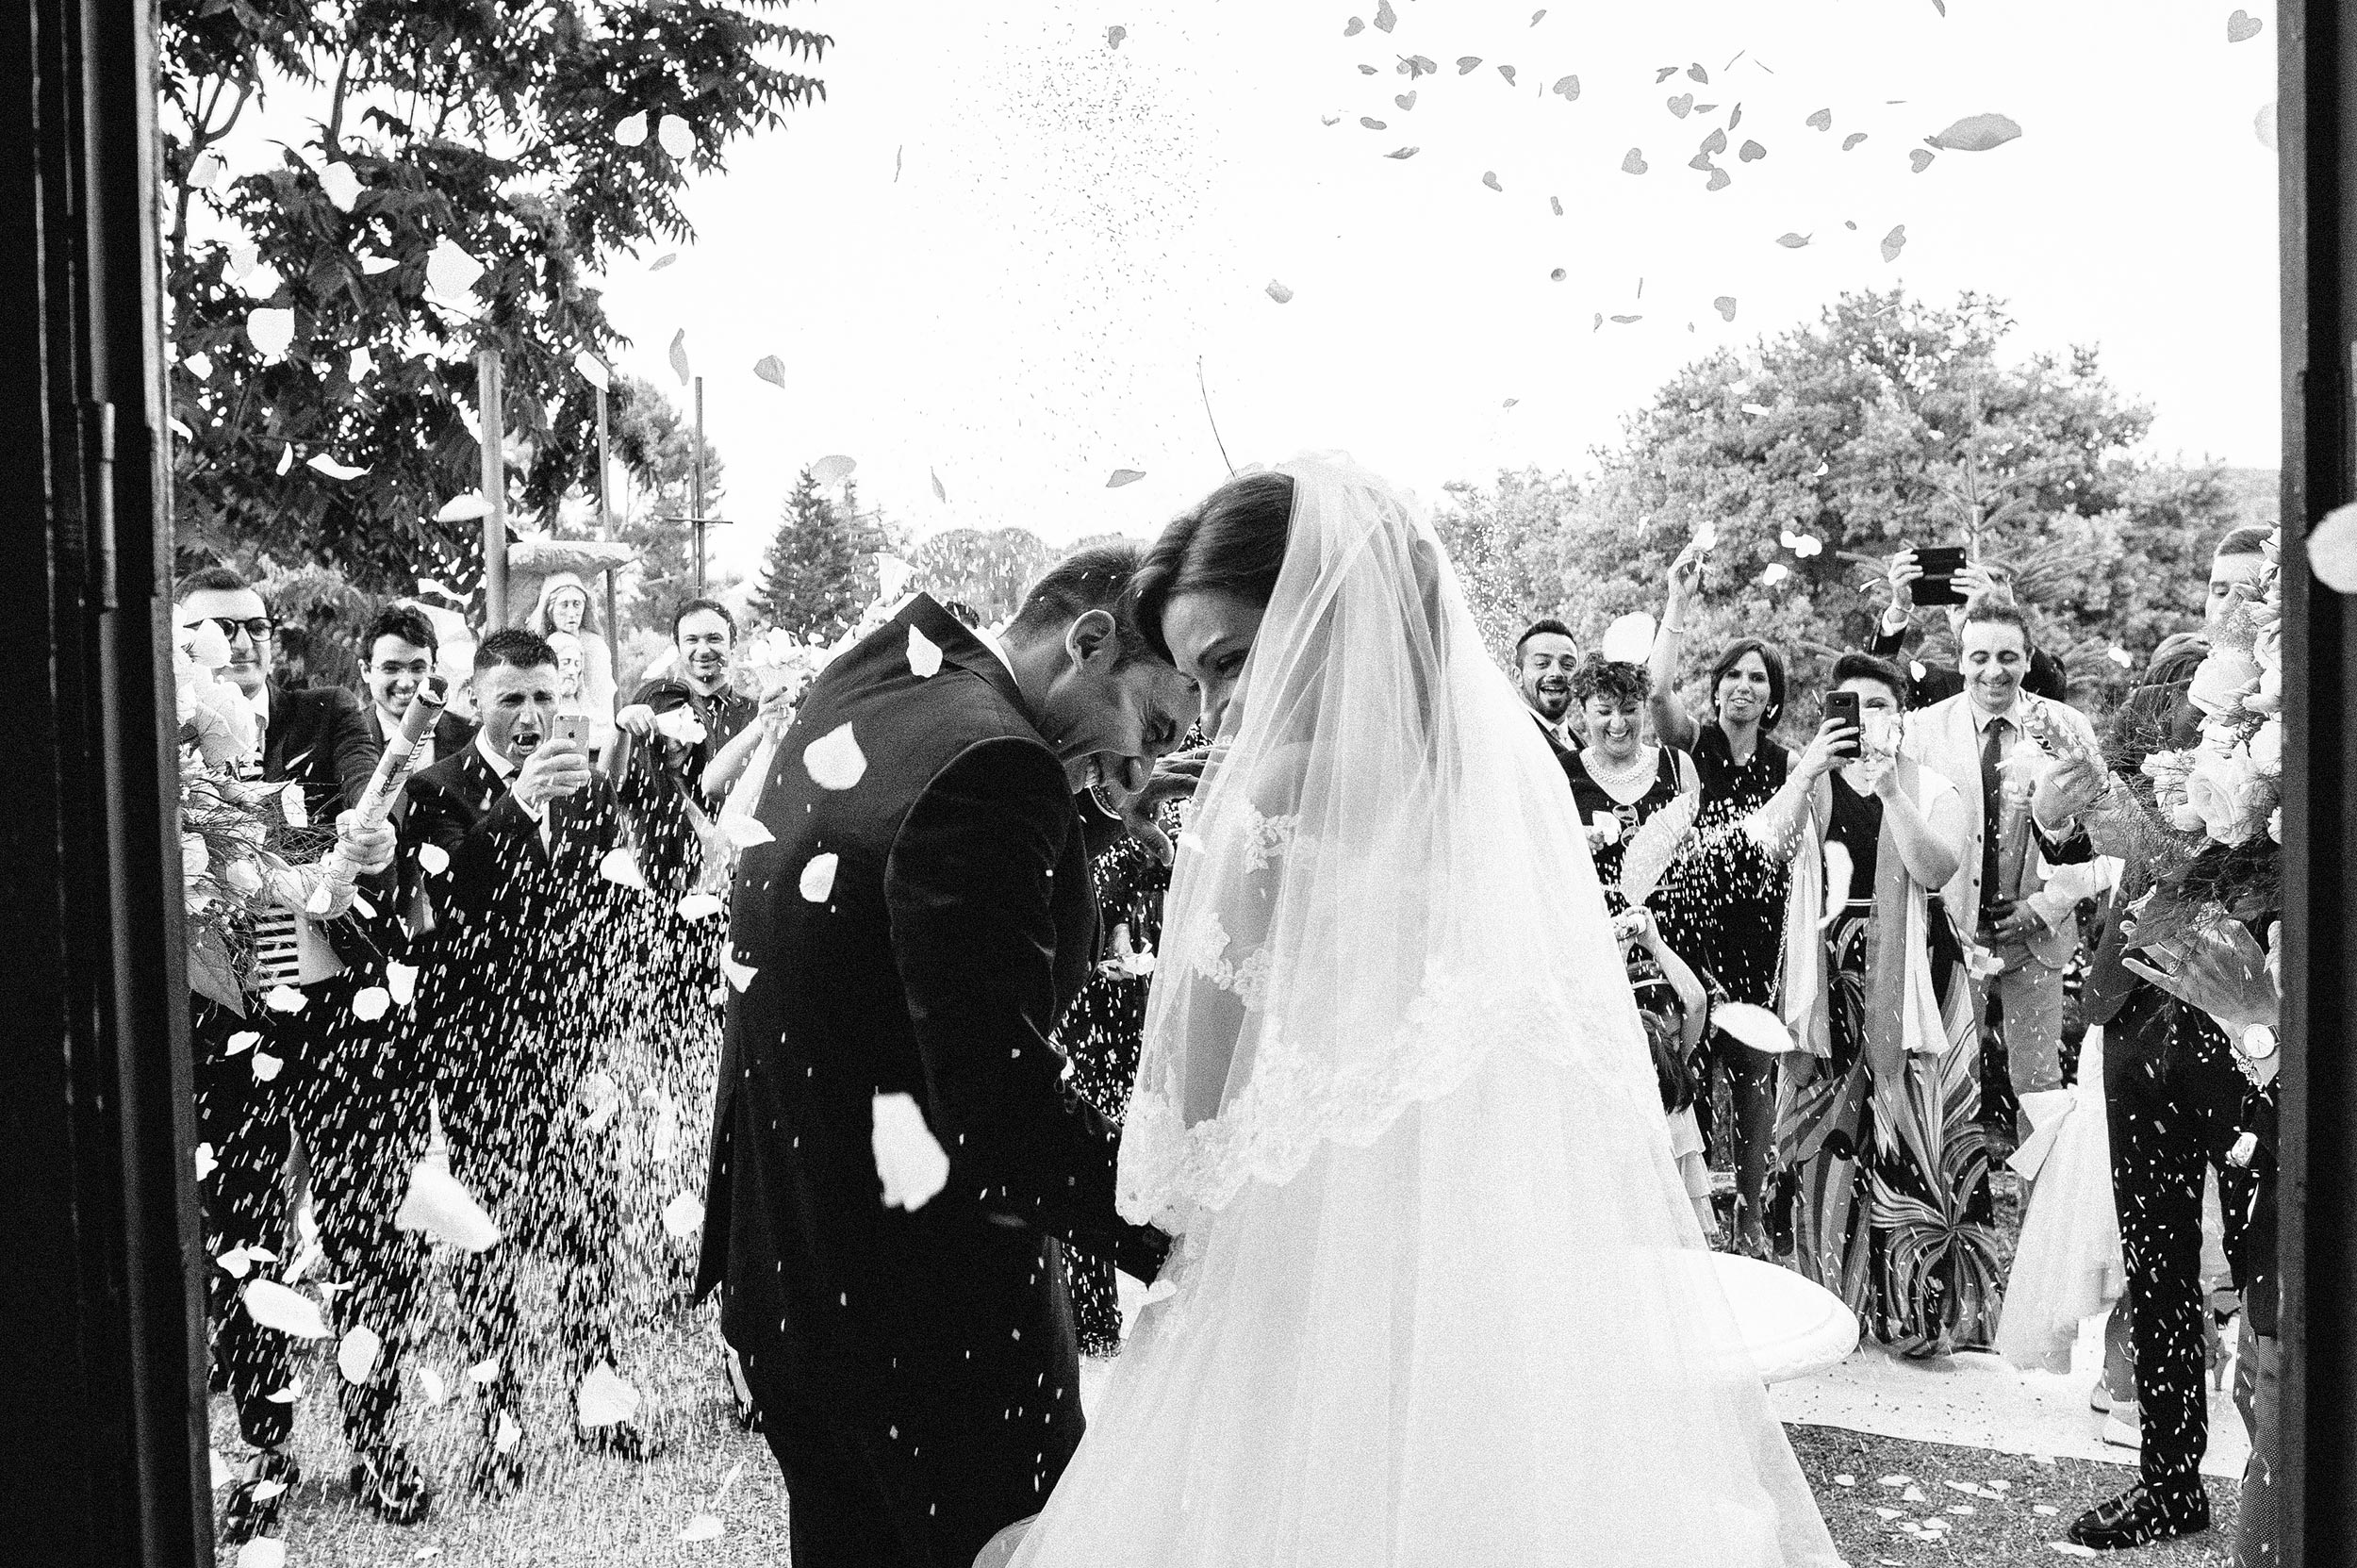 wedding-in-southern-italy-confetti-rice-outside-the-church-black-and-white-wedding-photography.jpg